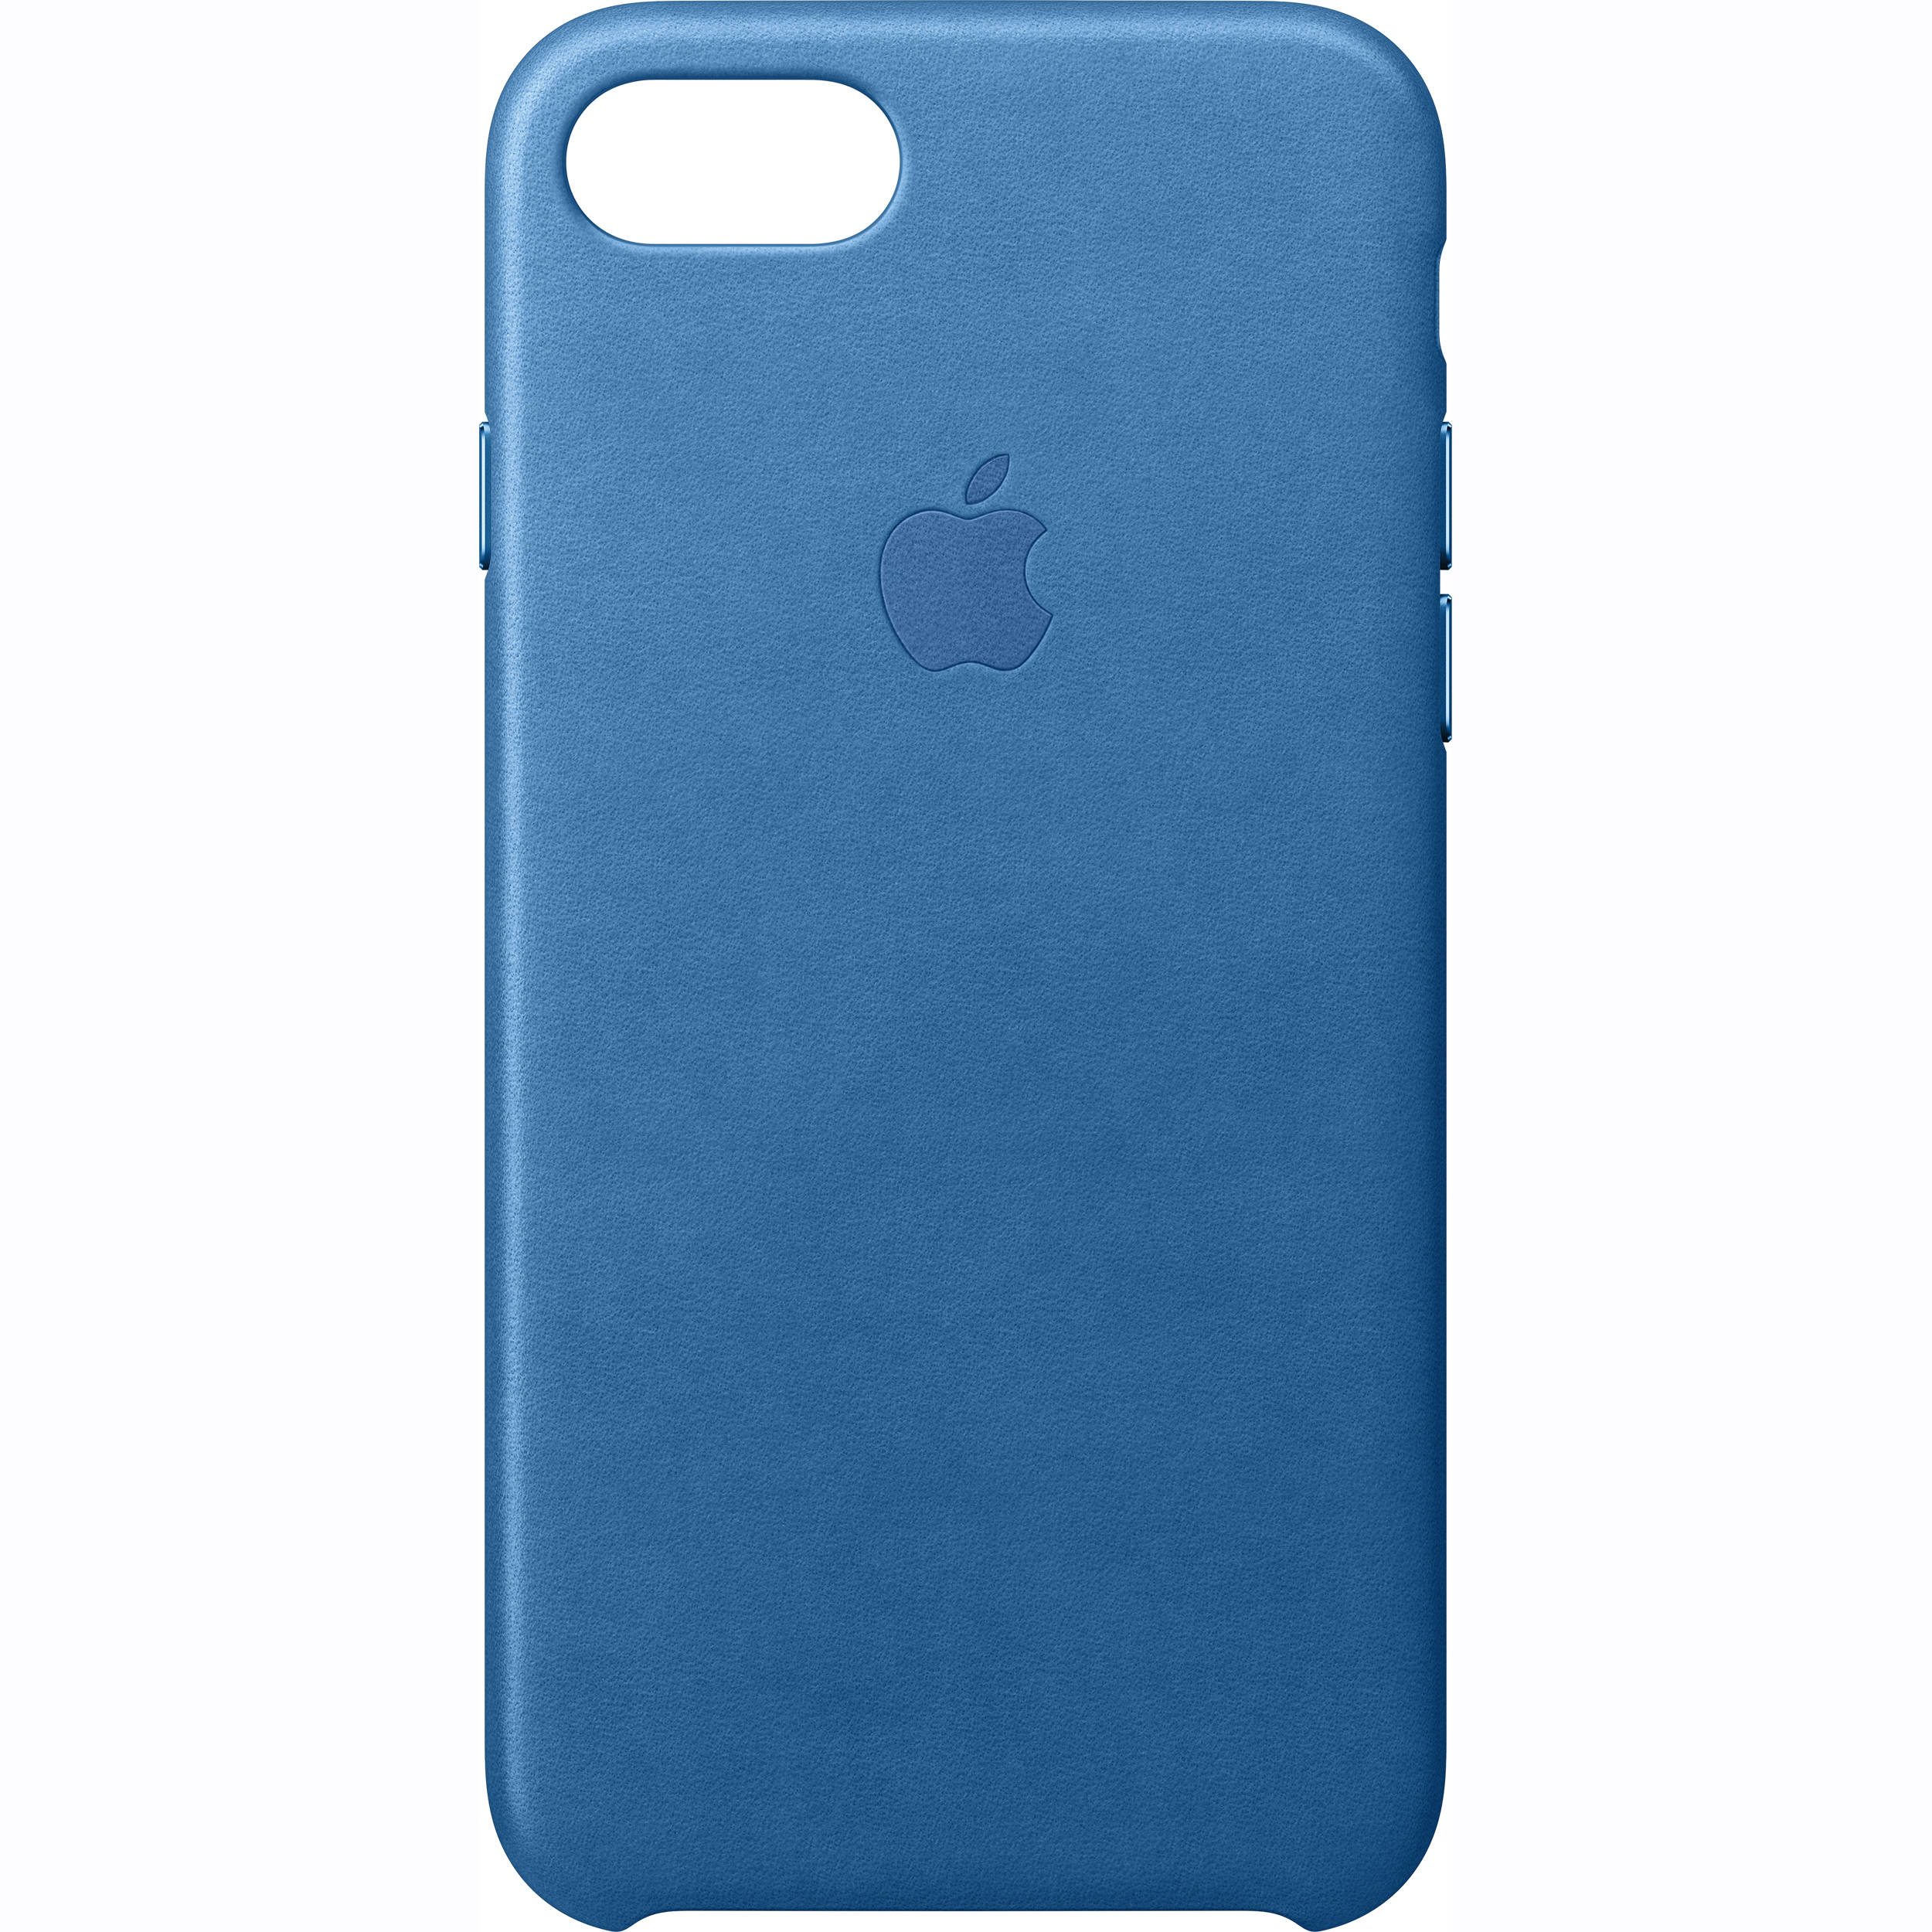 Apple Iphone 7 Leather Case Sea Blue Mmy42zm A B H Photo Video